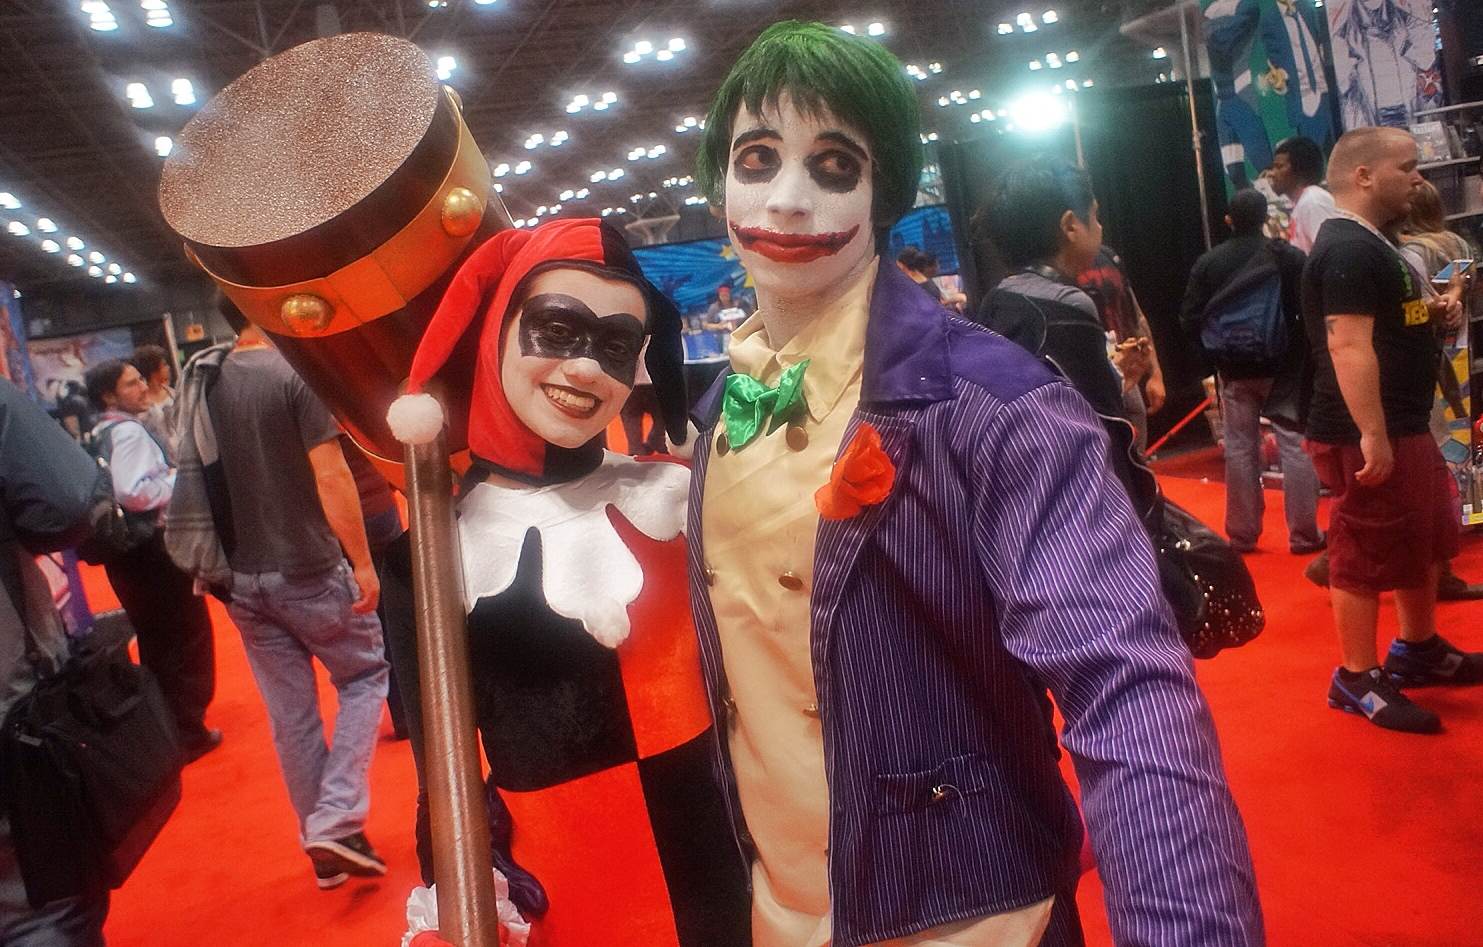 NYCC Cosplay: Baby Hulk, Cranky Zombies And A DC/Marvel Power Couple